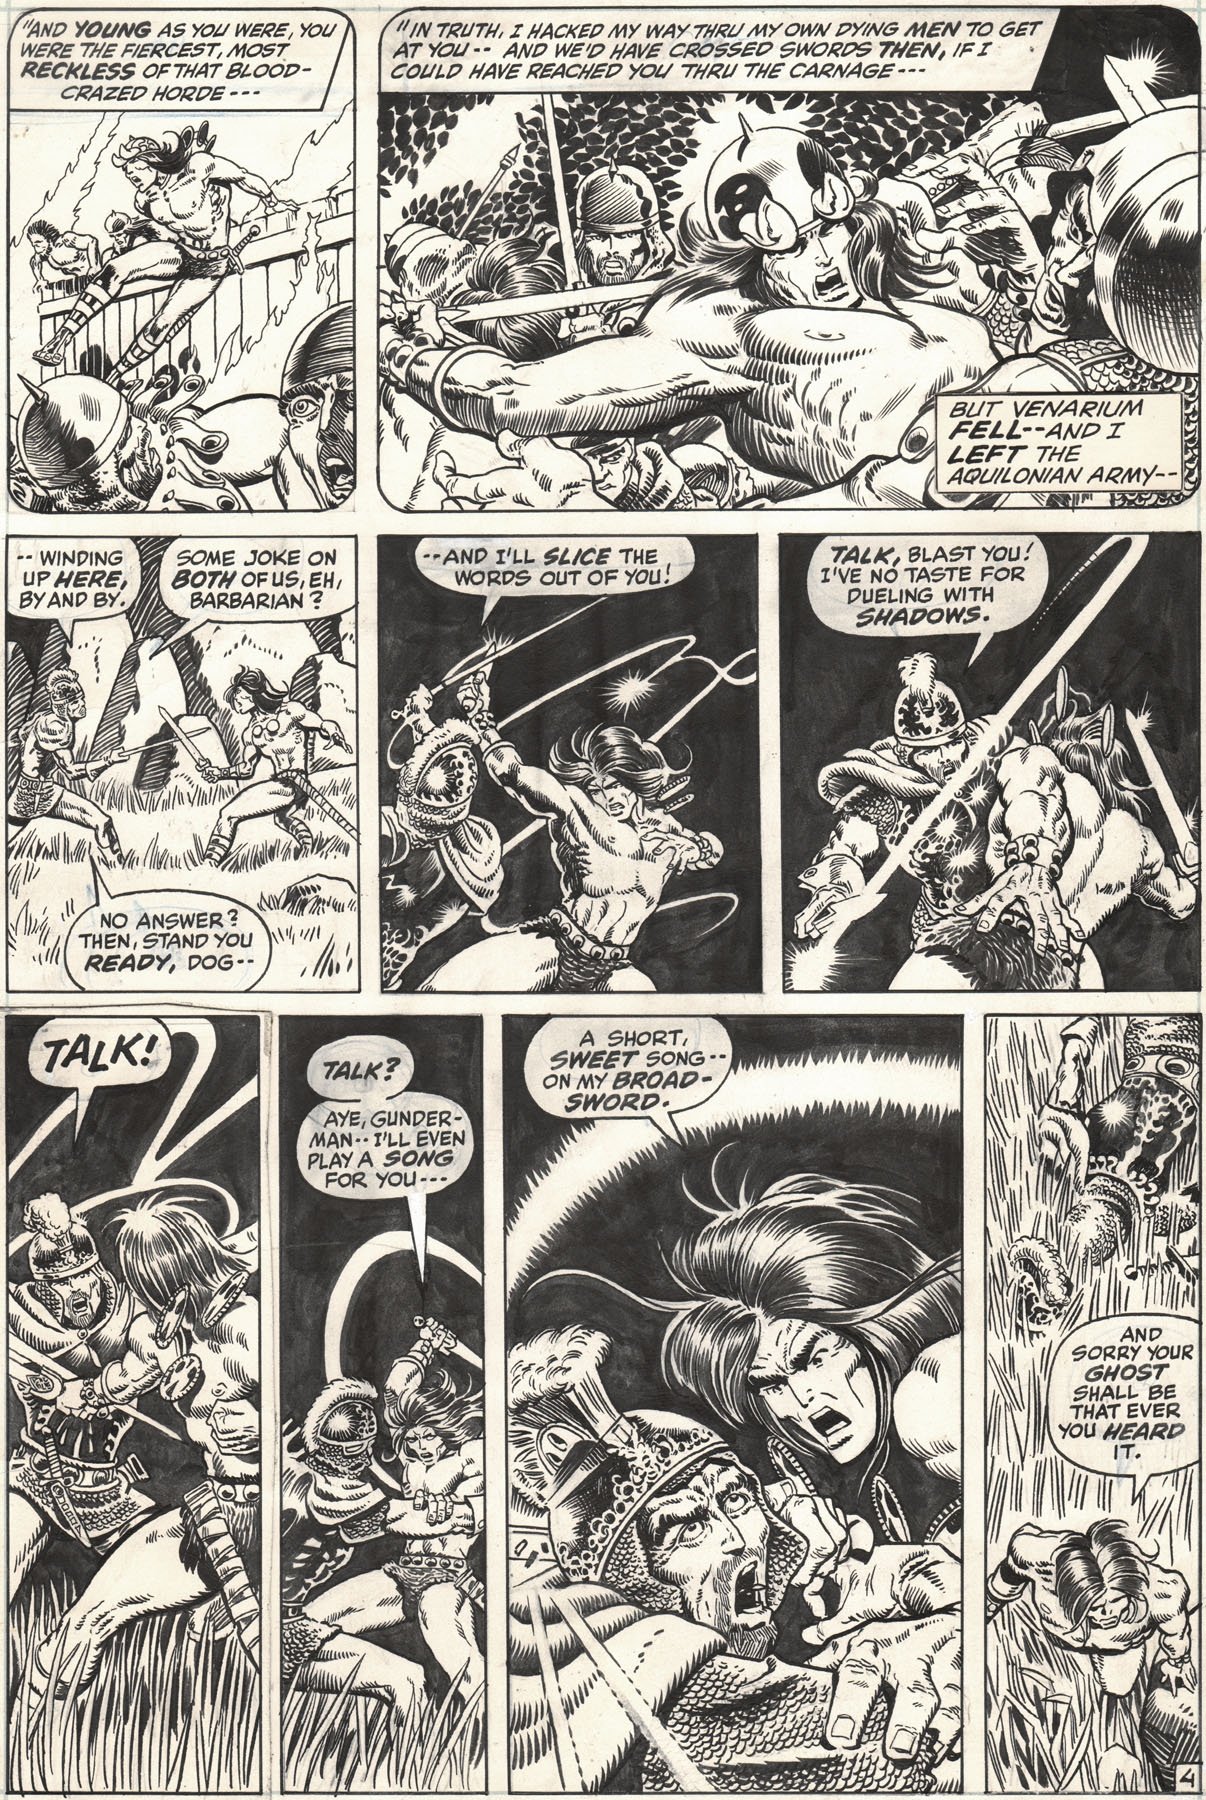 Barry Windsor Smith Conan The Barbarian 8 Page 1971 From The Classic Run With Conan In All Nine Panels In Original Art Auctions And Exchange Comiclink Com S Closed Featured Auction Highlights 8 Comic